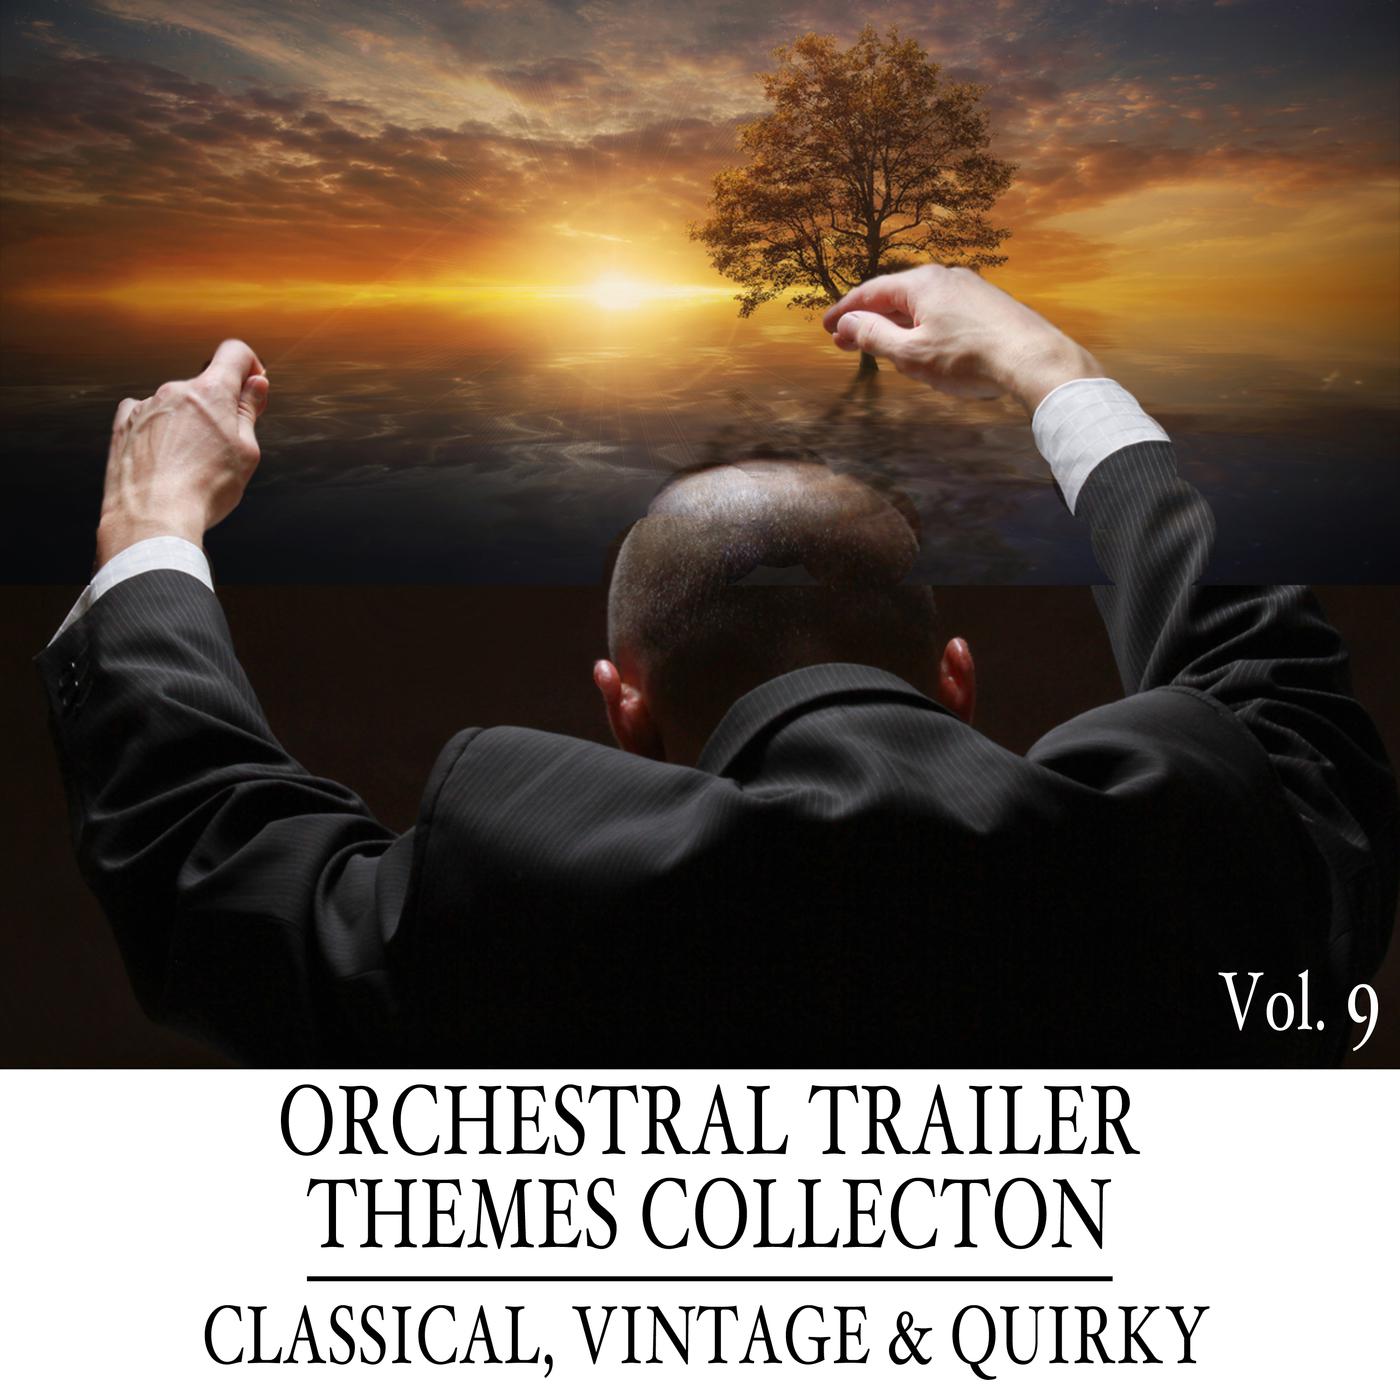 Orchestral Trailer Themes Collection, Vol. 9: Classical, Vintage & Quirky